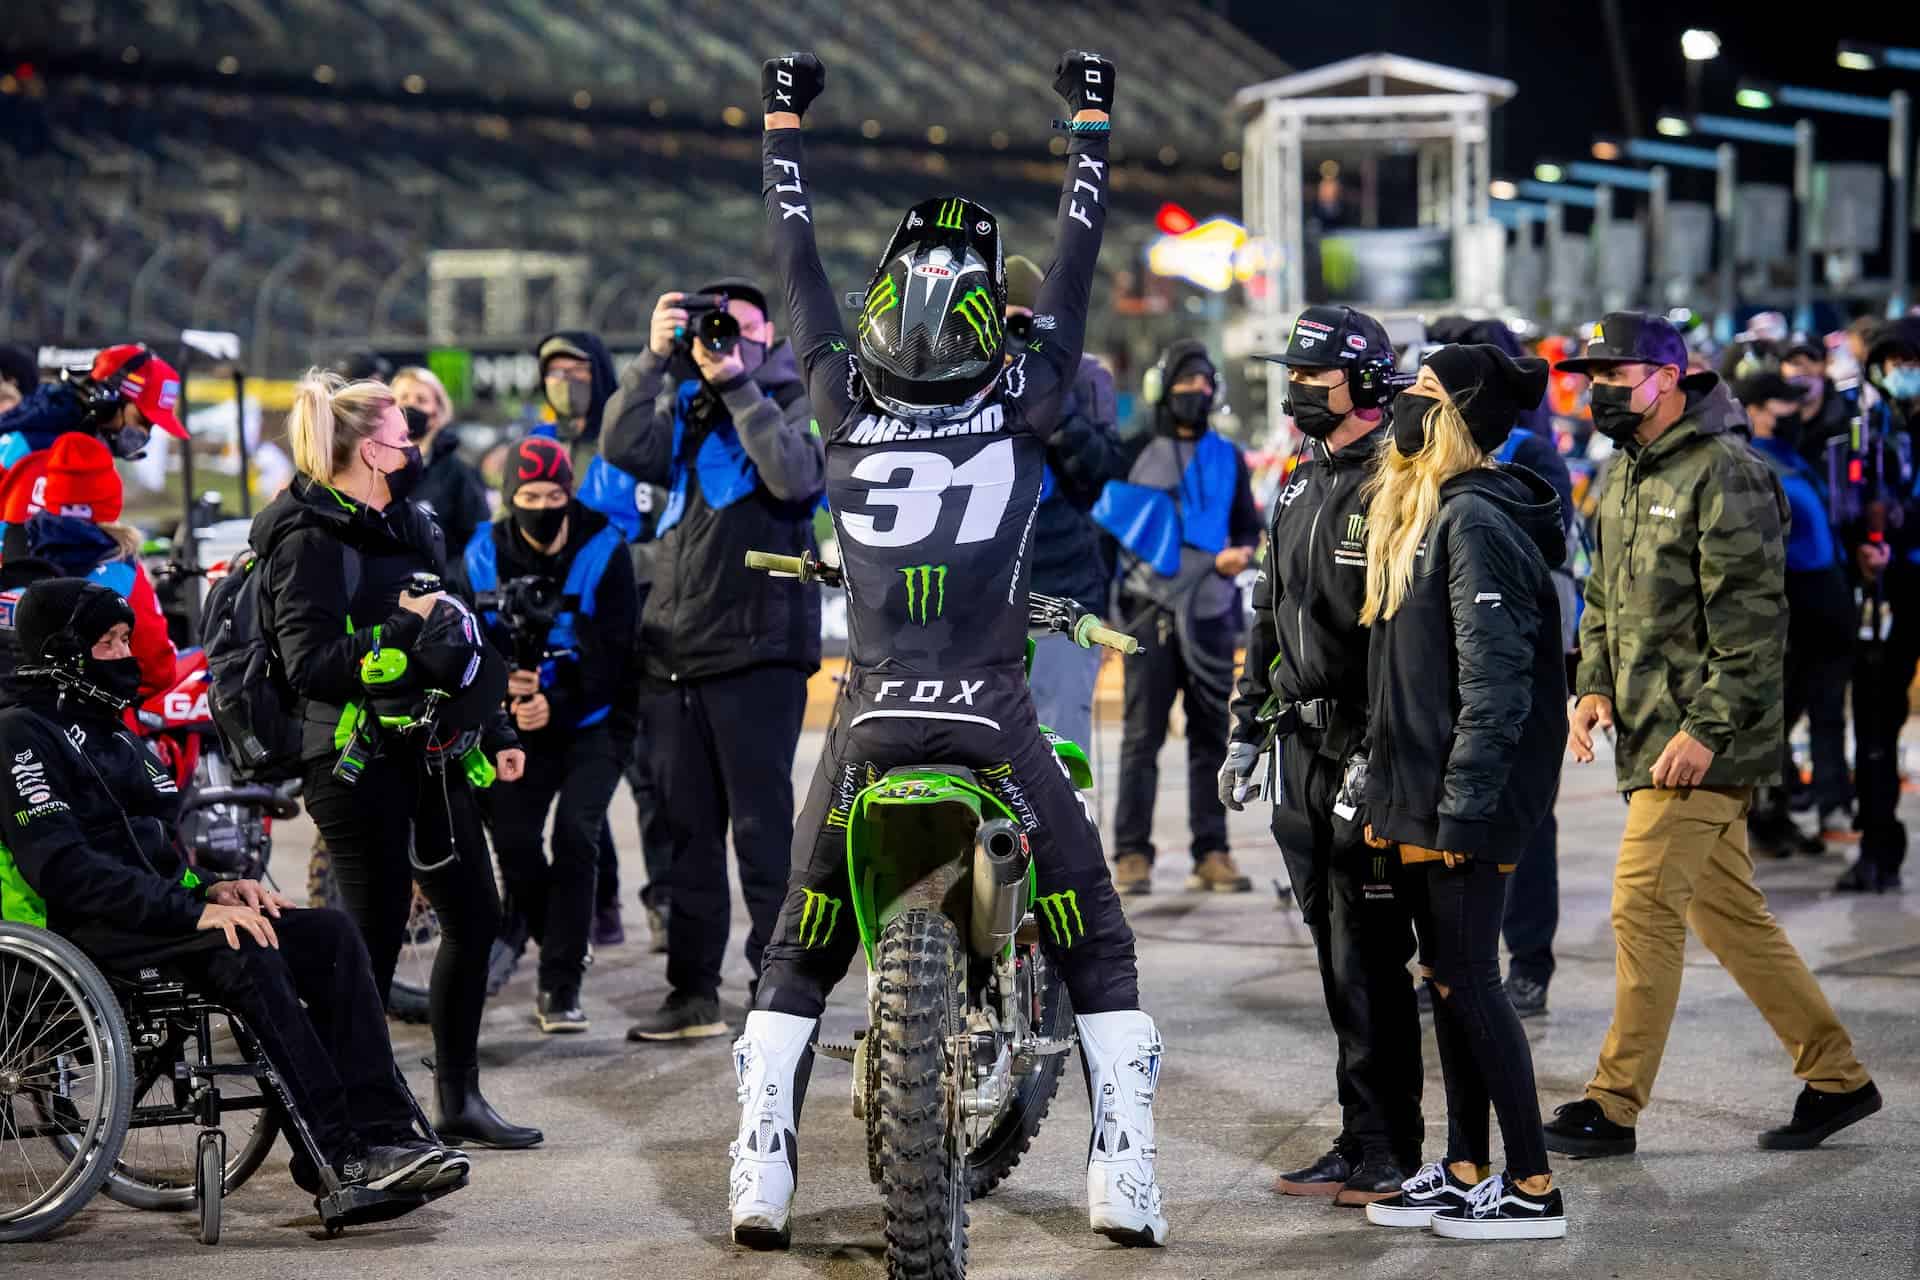 Cameron Mcadoo celebrates after his victory at the prestigious Daytona Supercross course. Photo by Feld Entertainment, Inc.